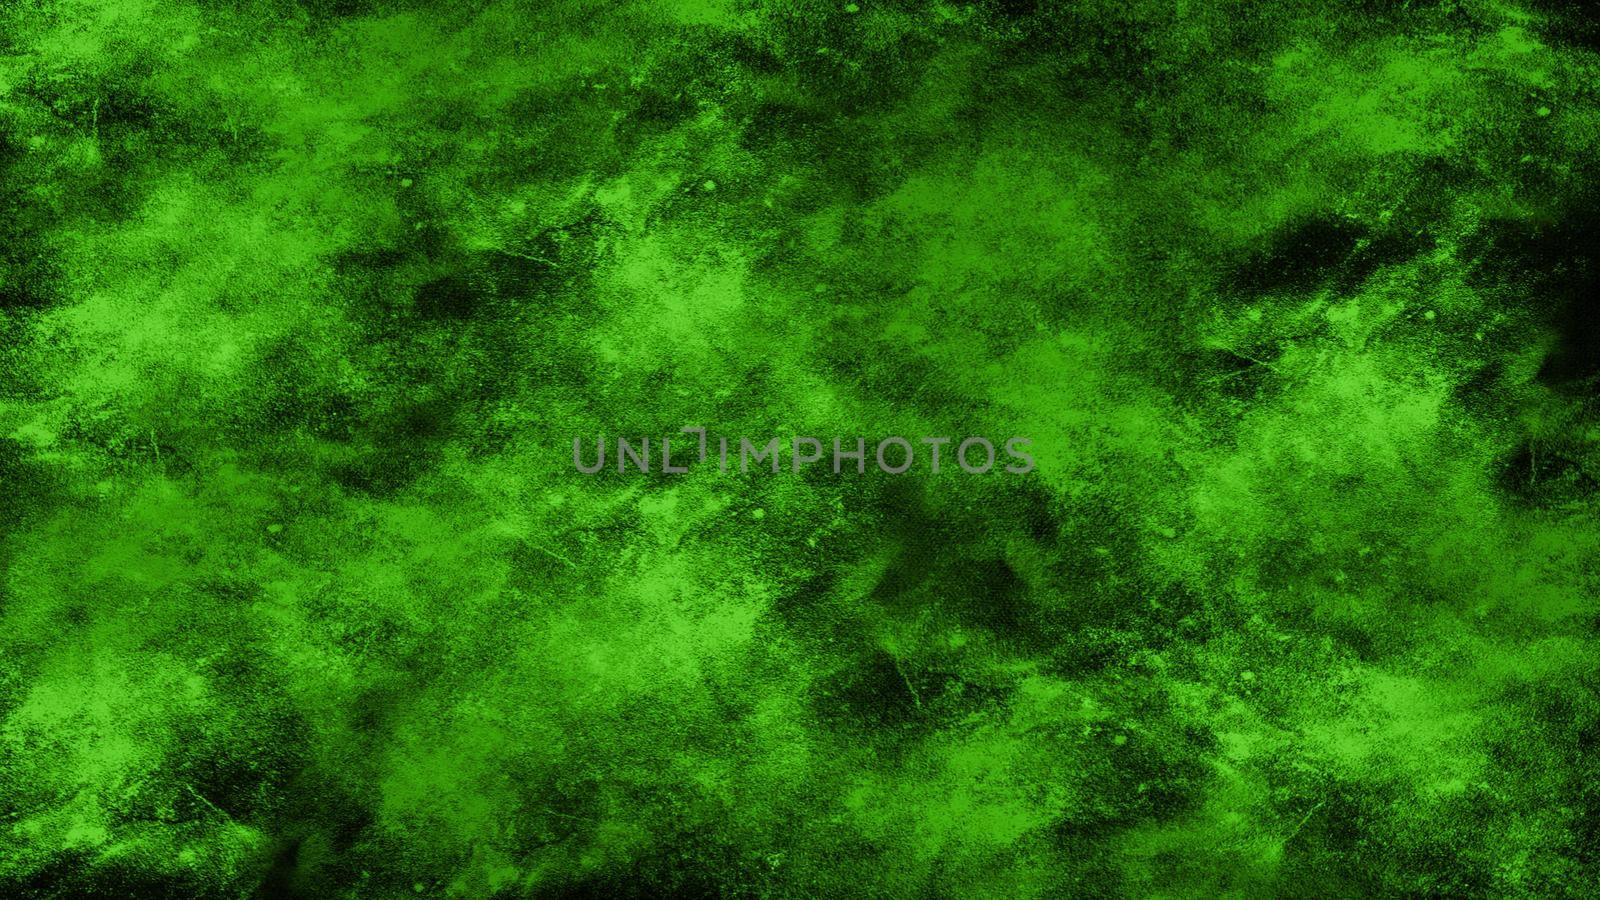 Dark grungy abstract design. Green background with black worn spots, in HD aspect ratio.